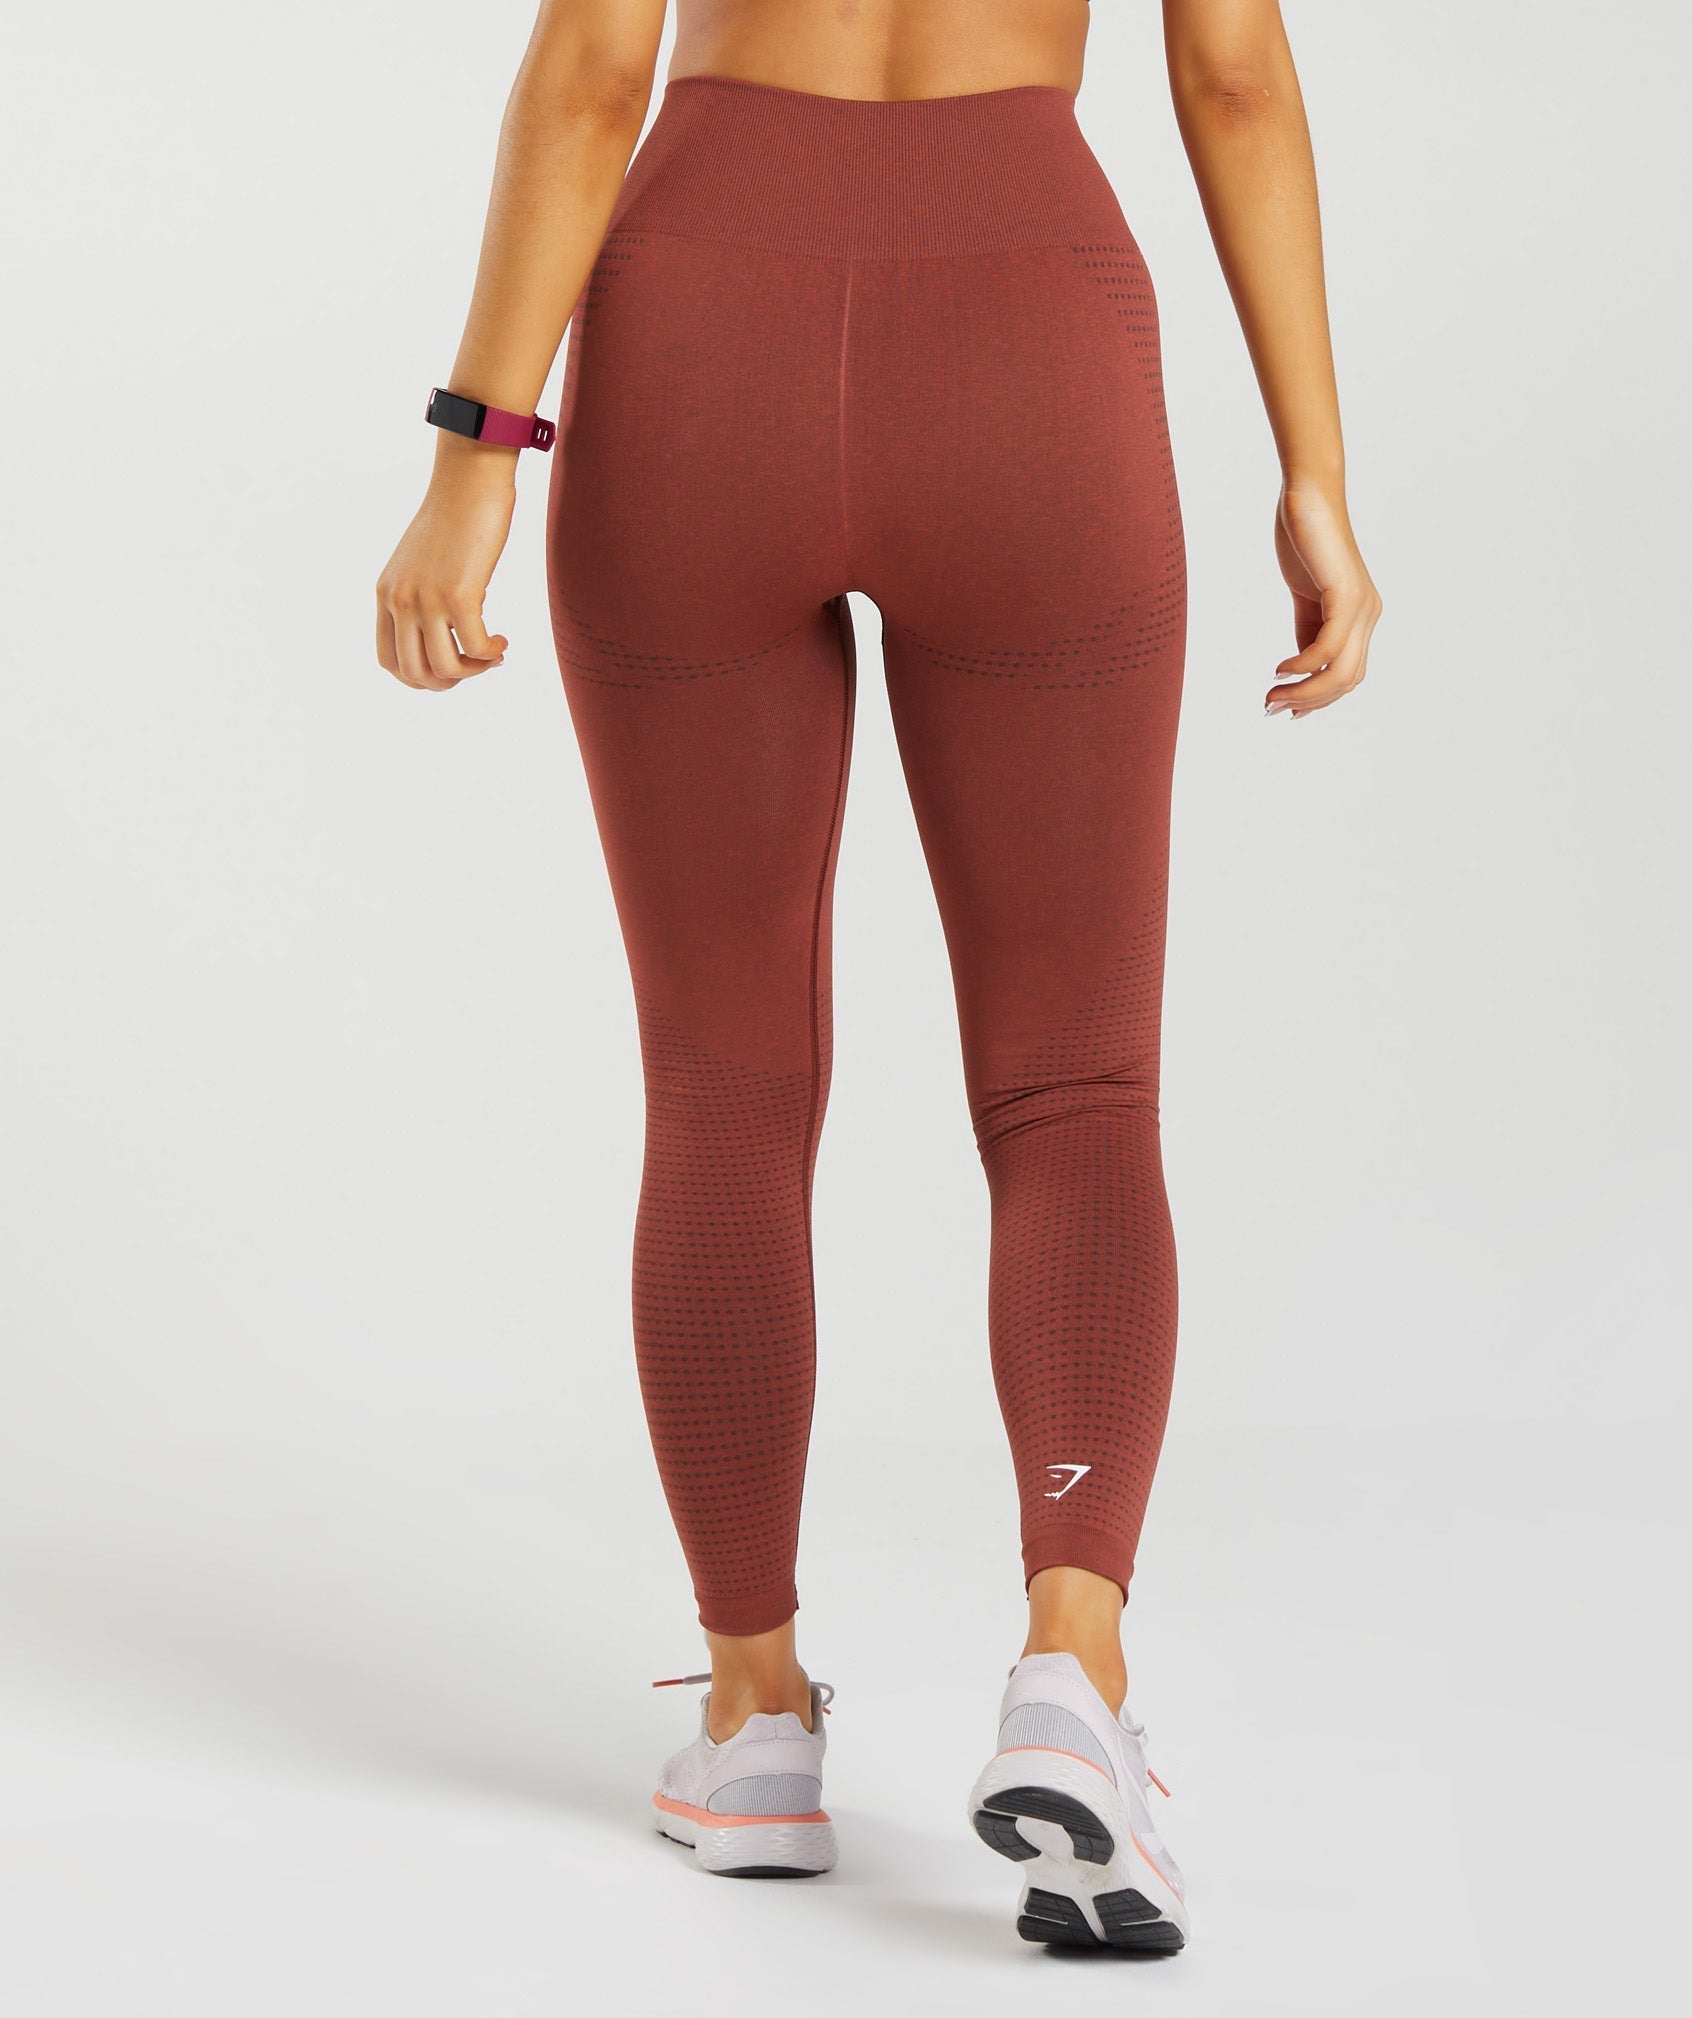 Gymshark Women's Size Small Slounge Soft Joggers Leggings Maroon Red Marl